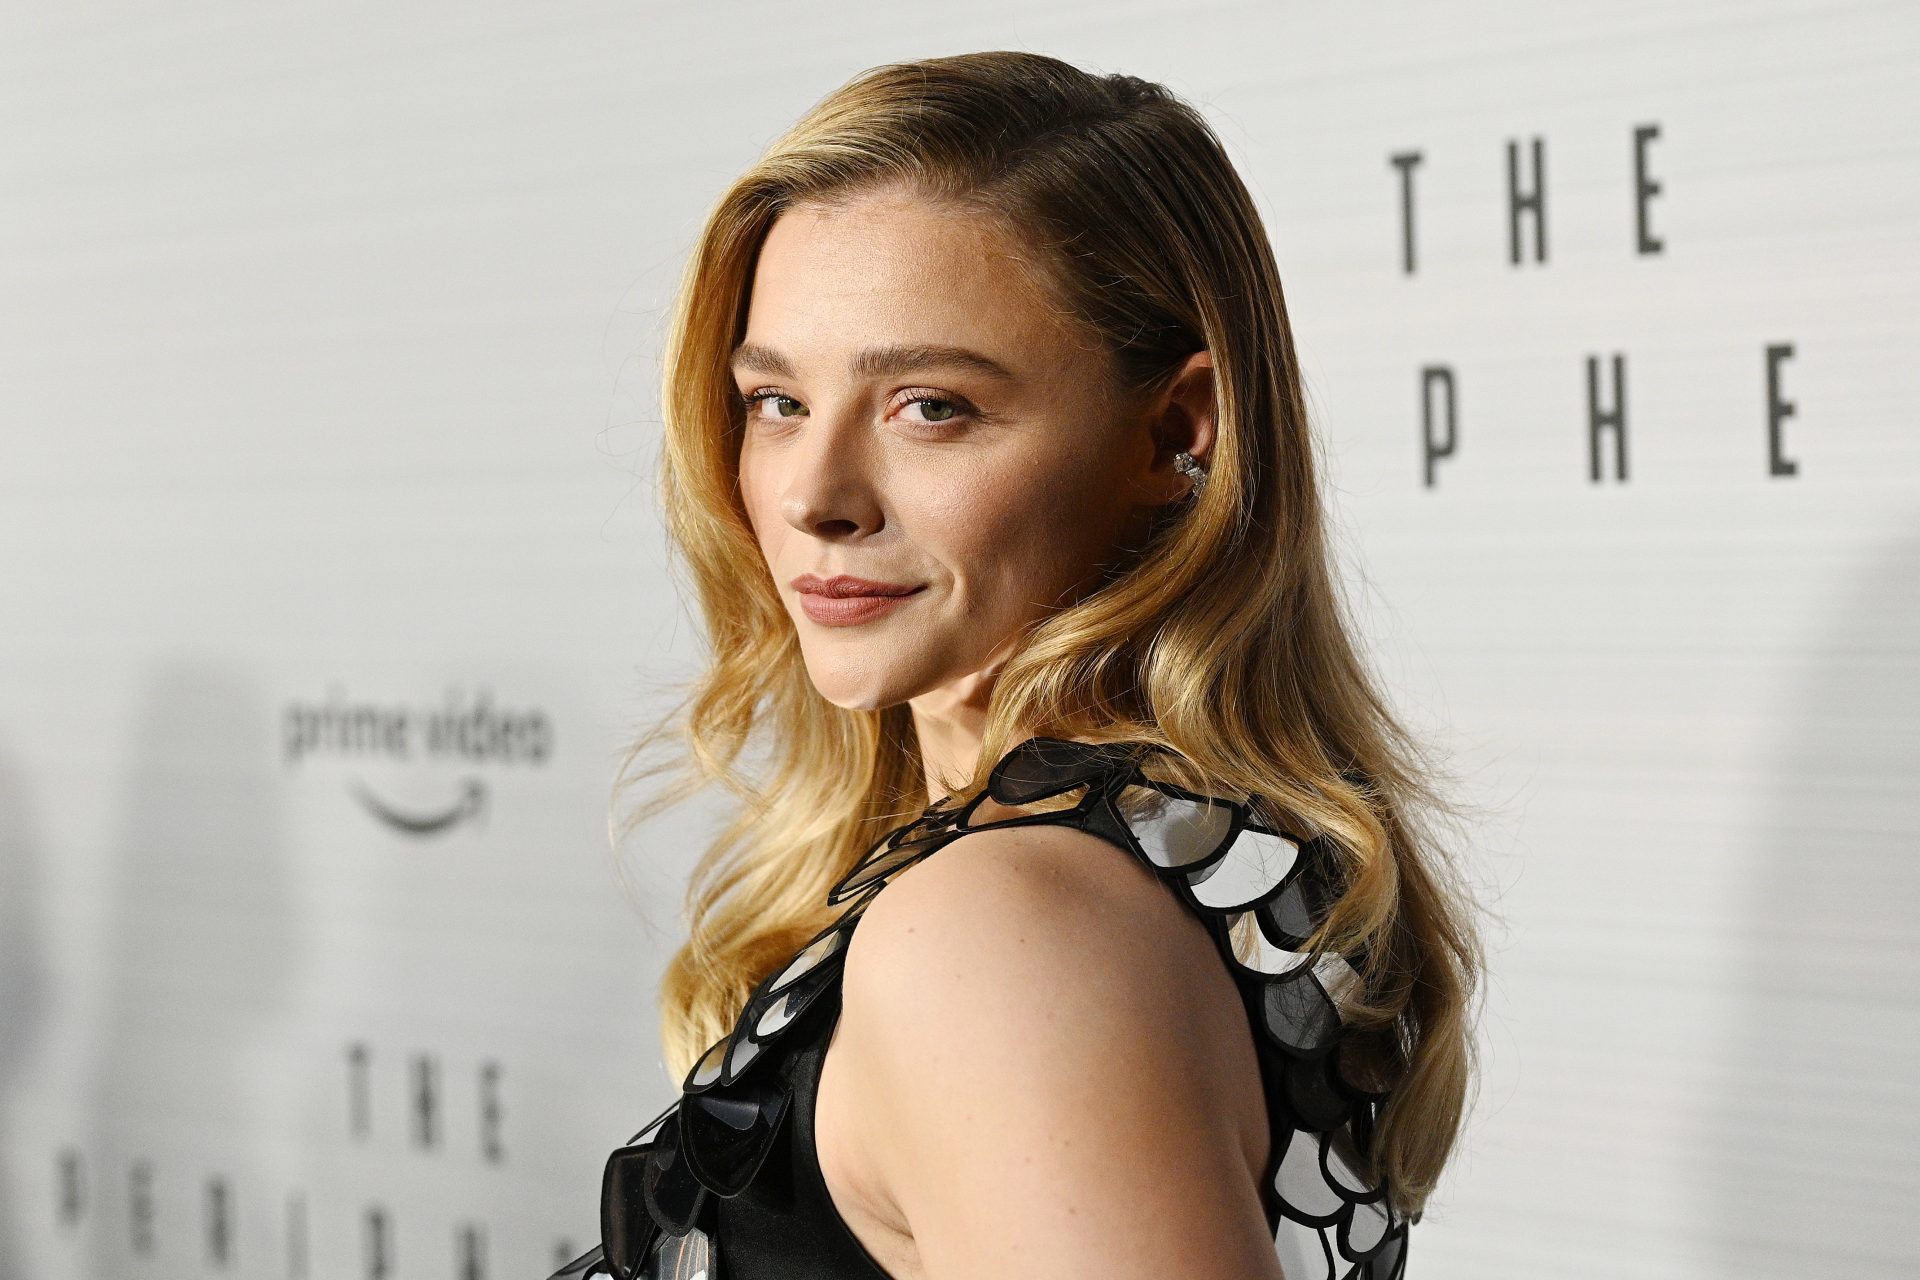 Chloe Grace Moretz says The Peripheral is 'sci-fi with a heart